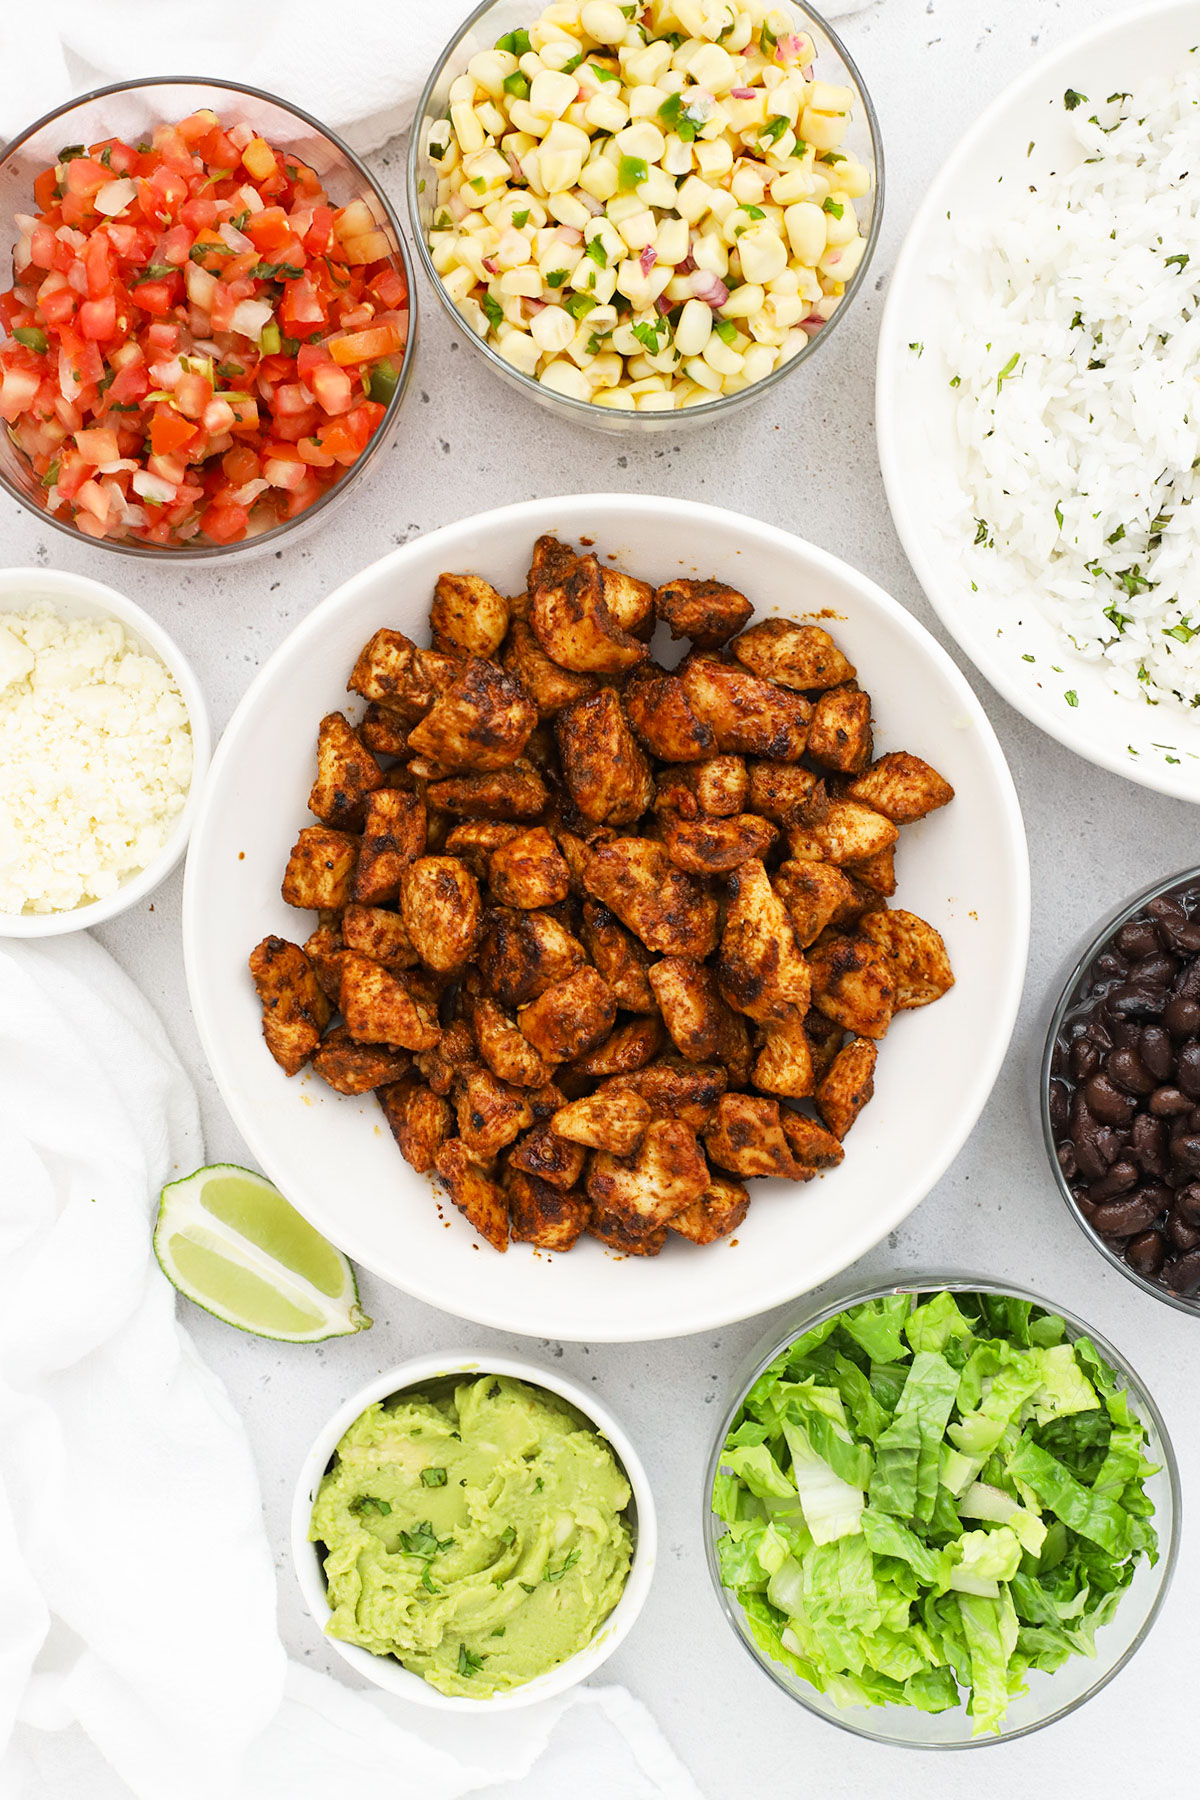 Ingredients for chipotle chicken burrito bowls at home